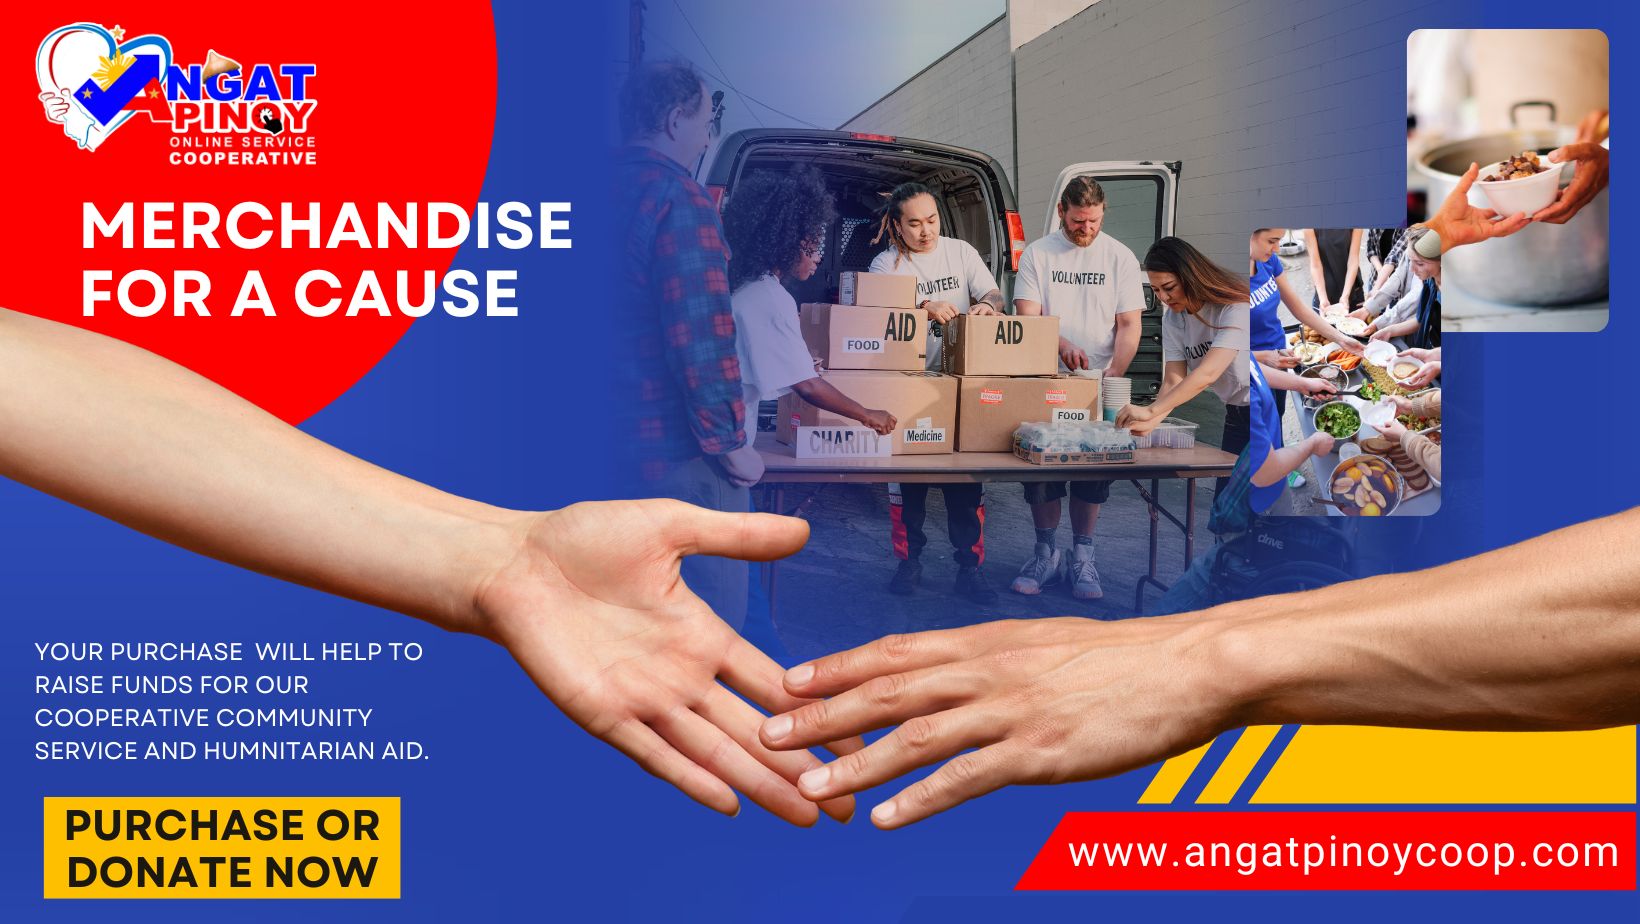 Angat Pinoy Merchandise for a Cause